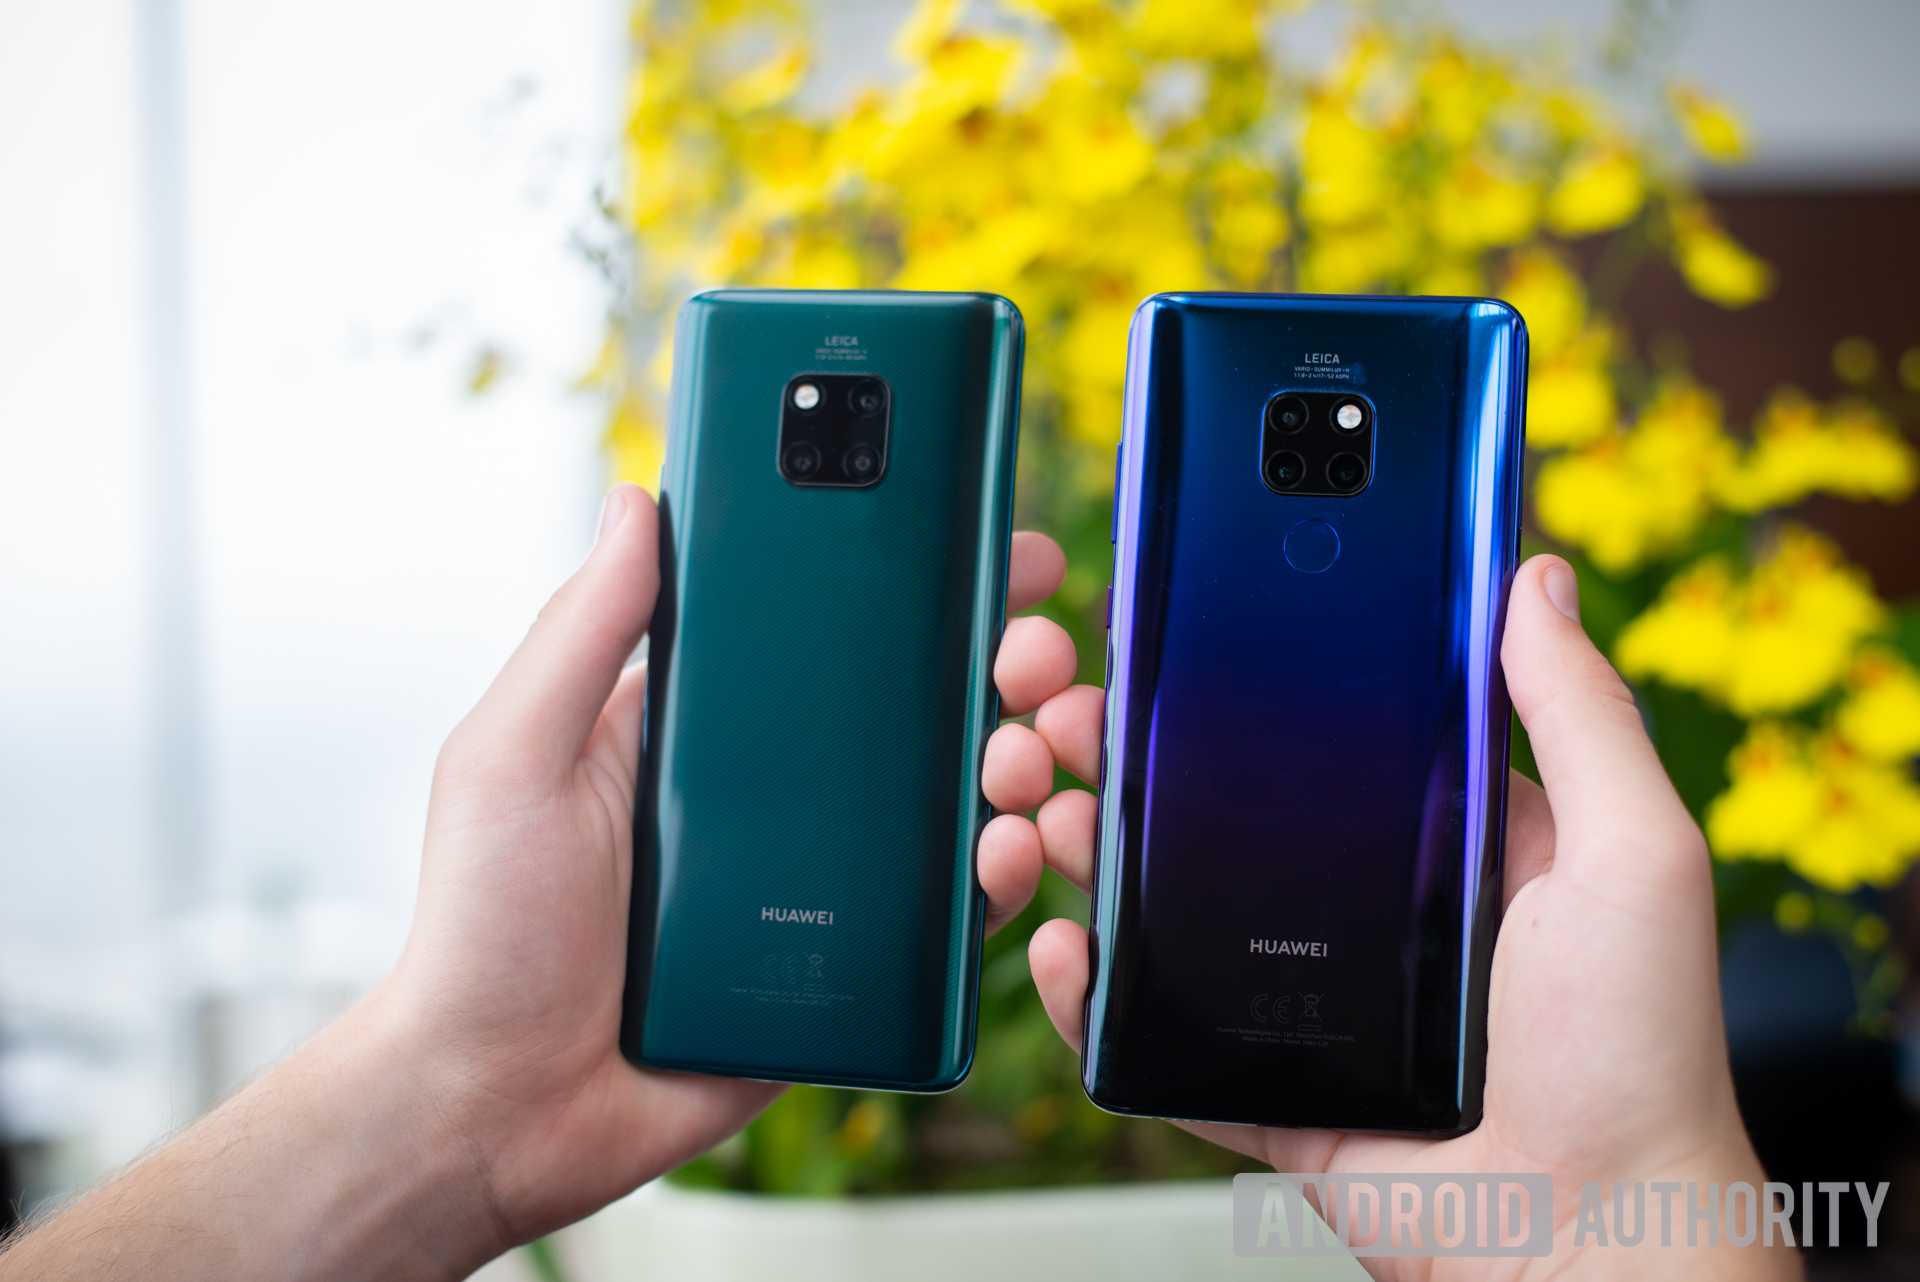 Wig huilen vangst HUAWEI Mate 20 Pro and HUAWEI Mate 20: Specs, release date, price